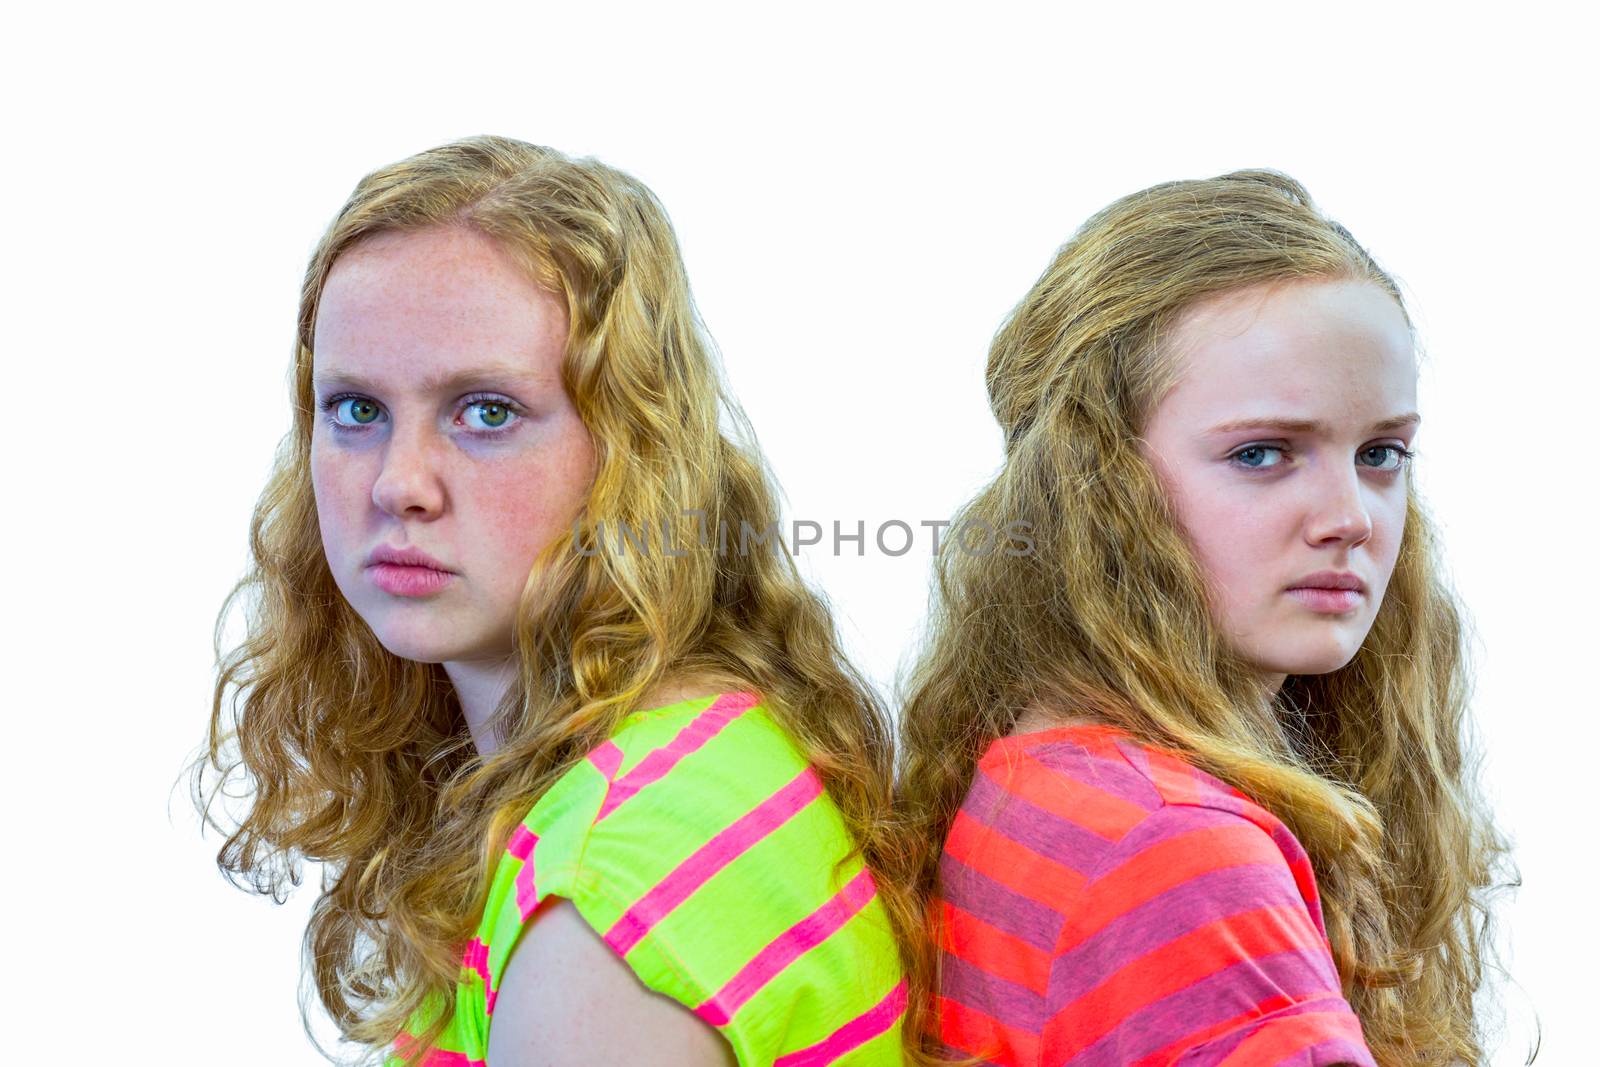 Two angry caucasian teenage girls by BenSchonewille